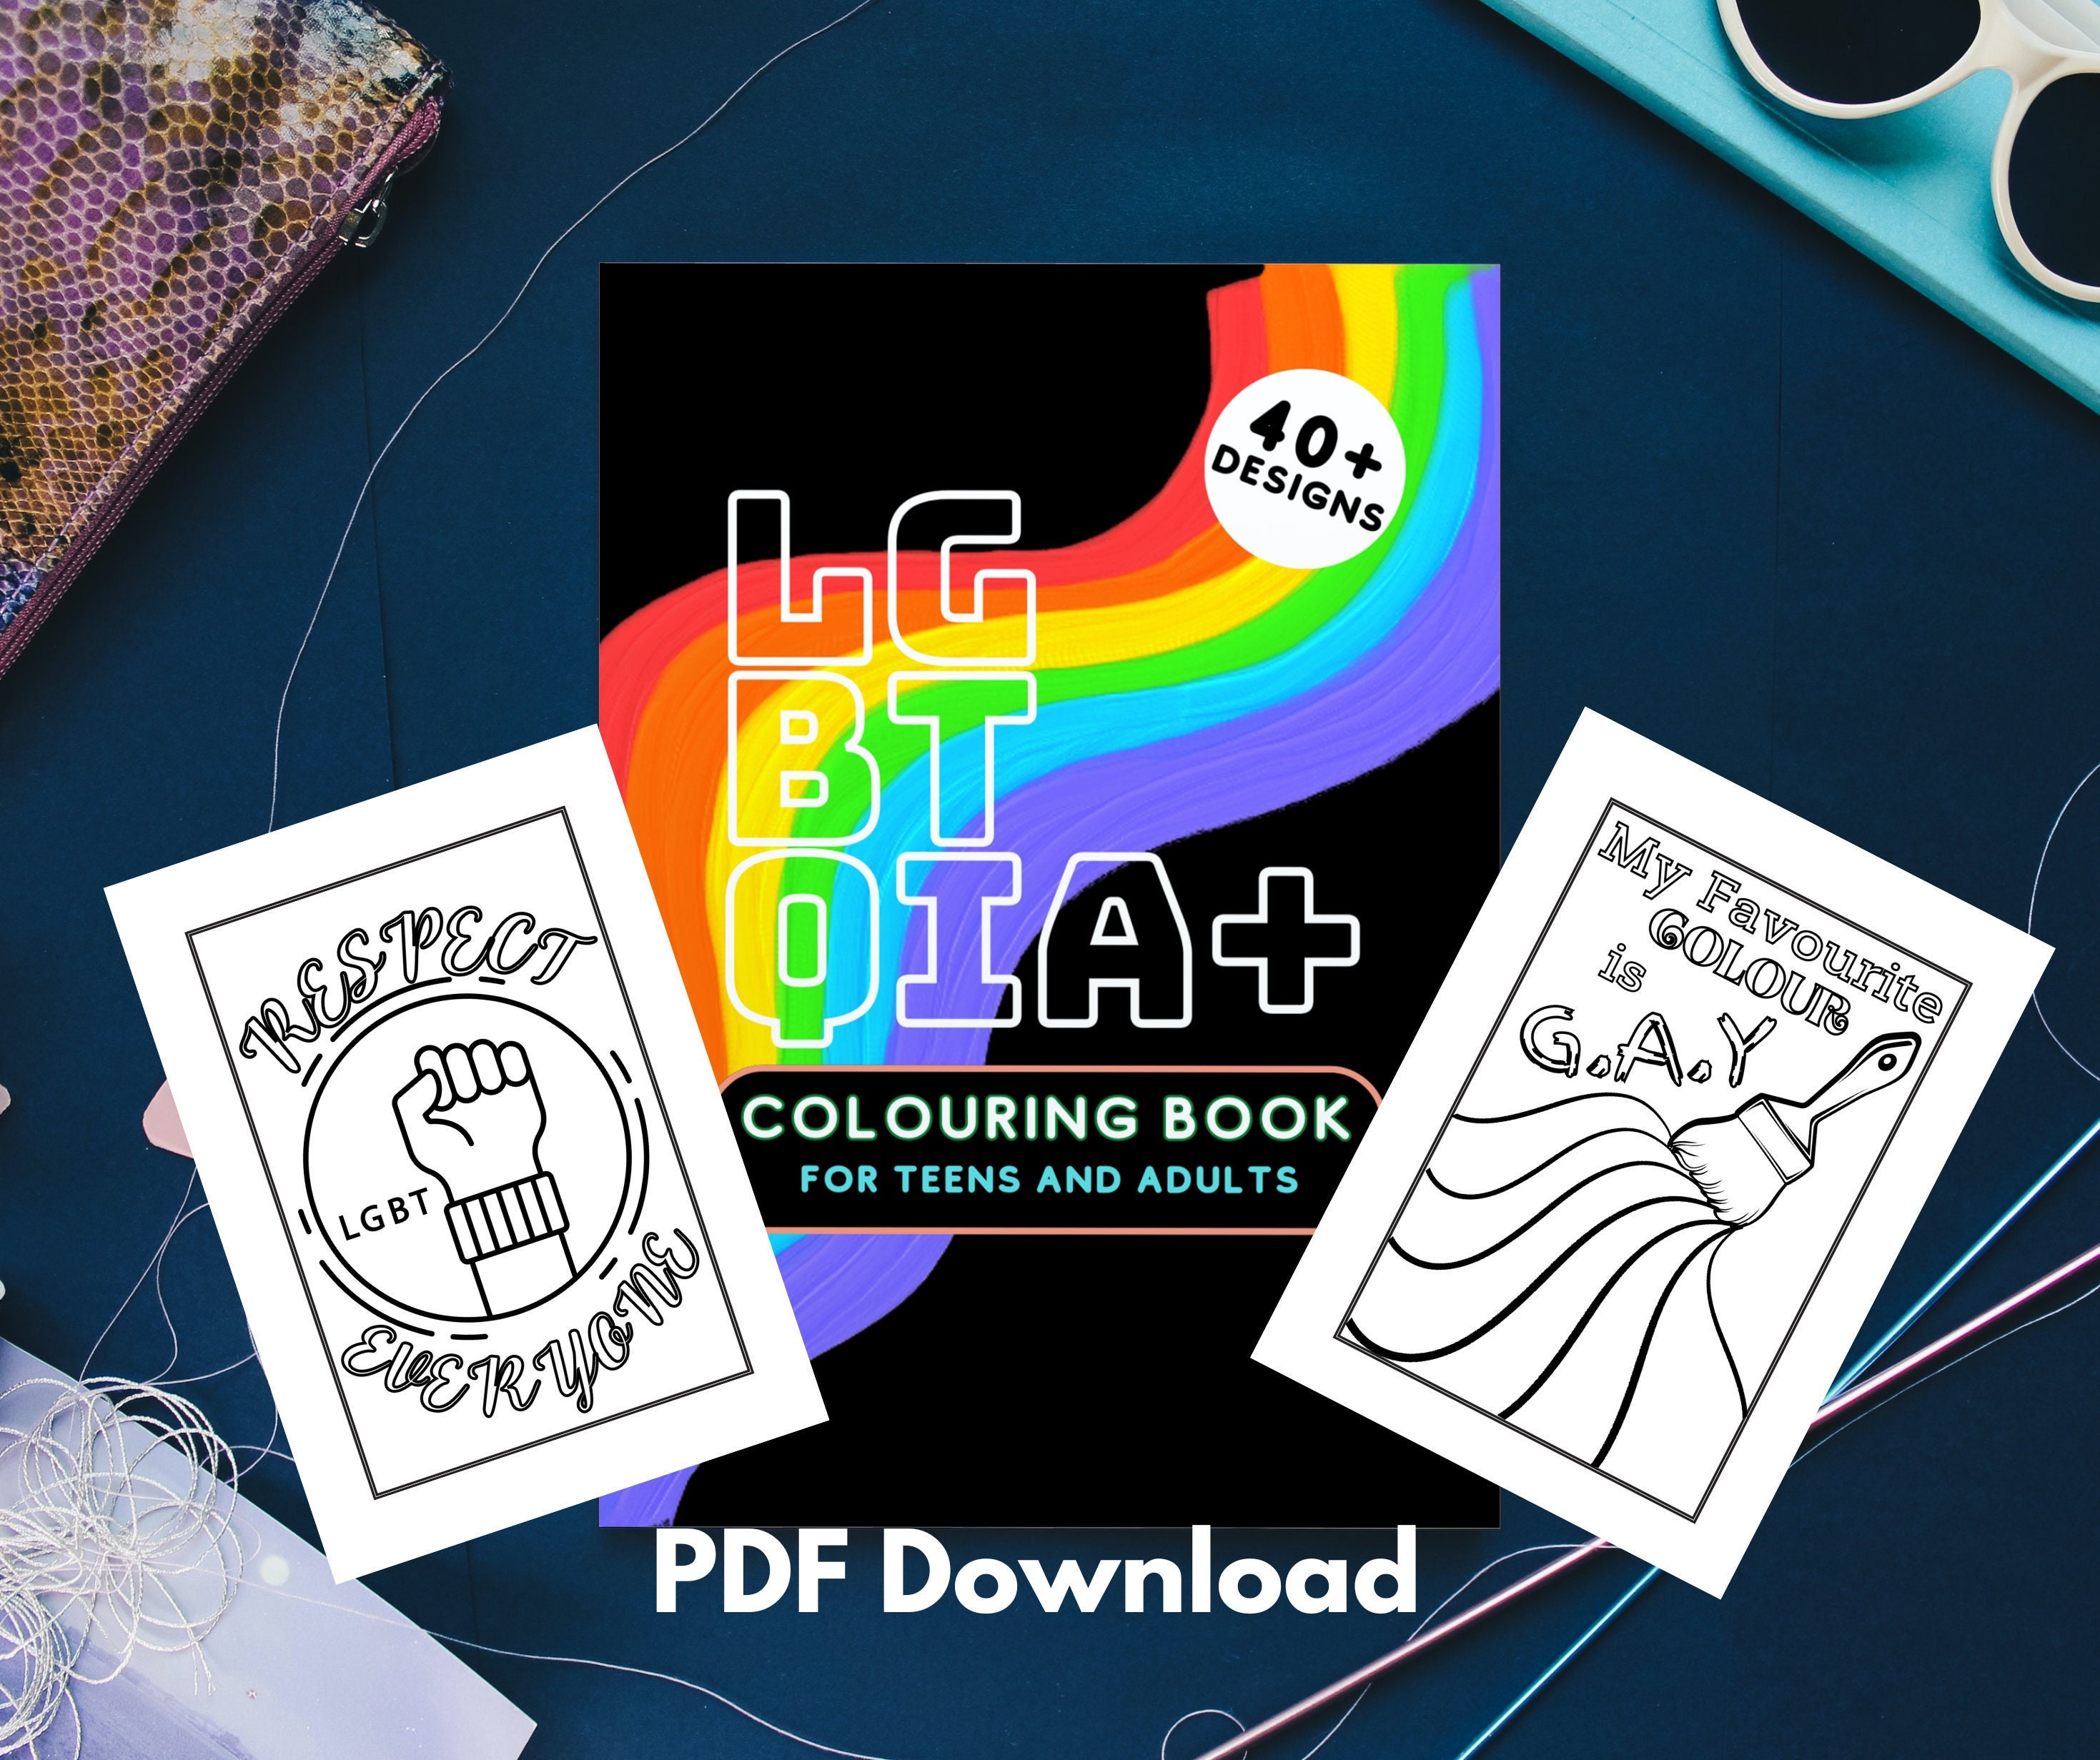 Drag Race A4 Colouring Book Volume 2 Drag Queen, LGBT Colouring Book, High  Quality and Hand Drawn 